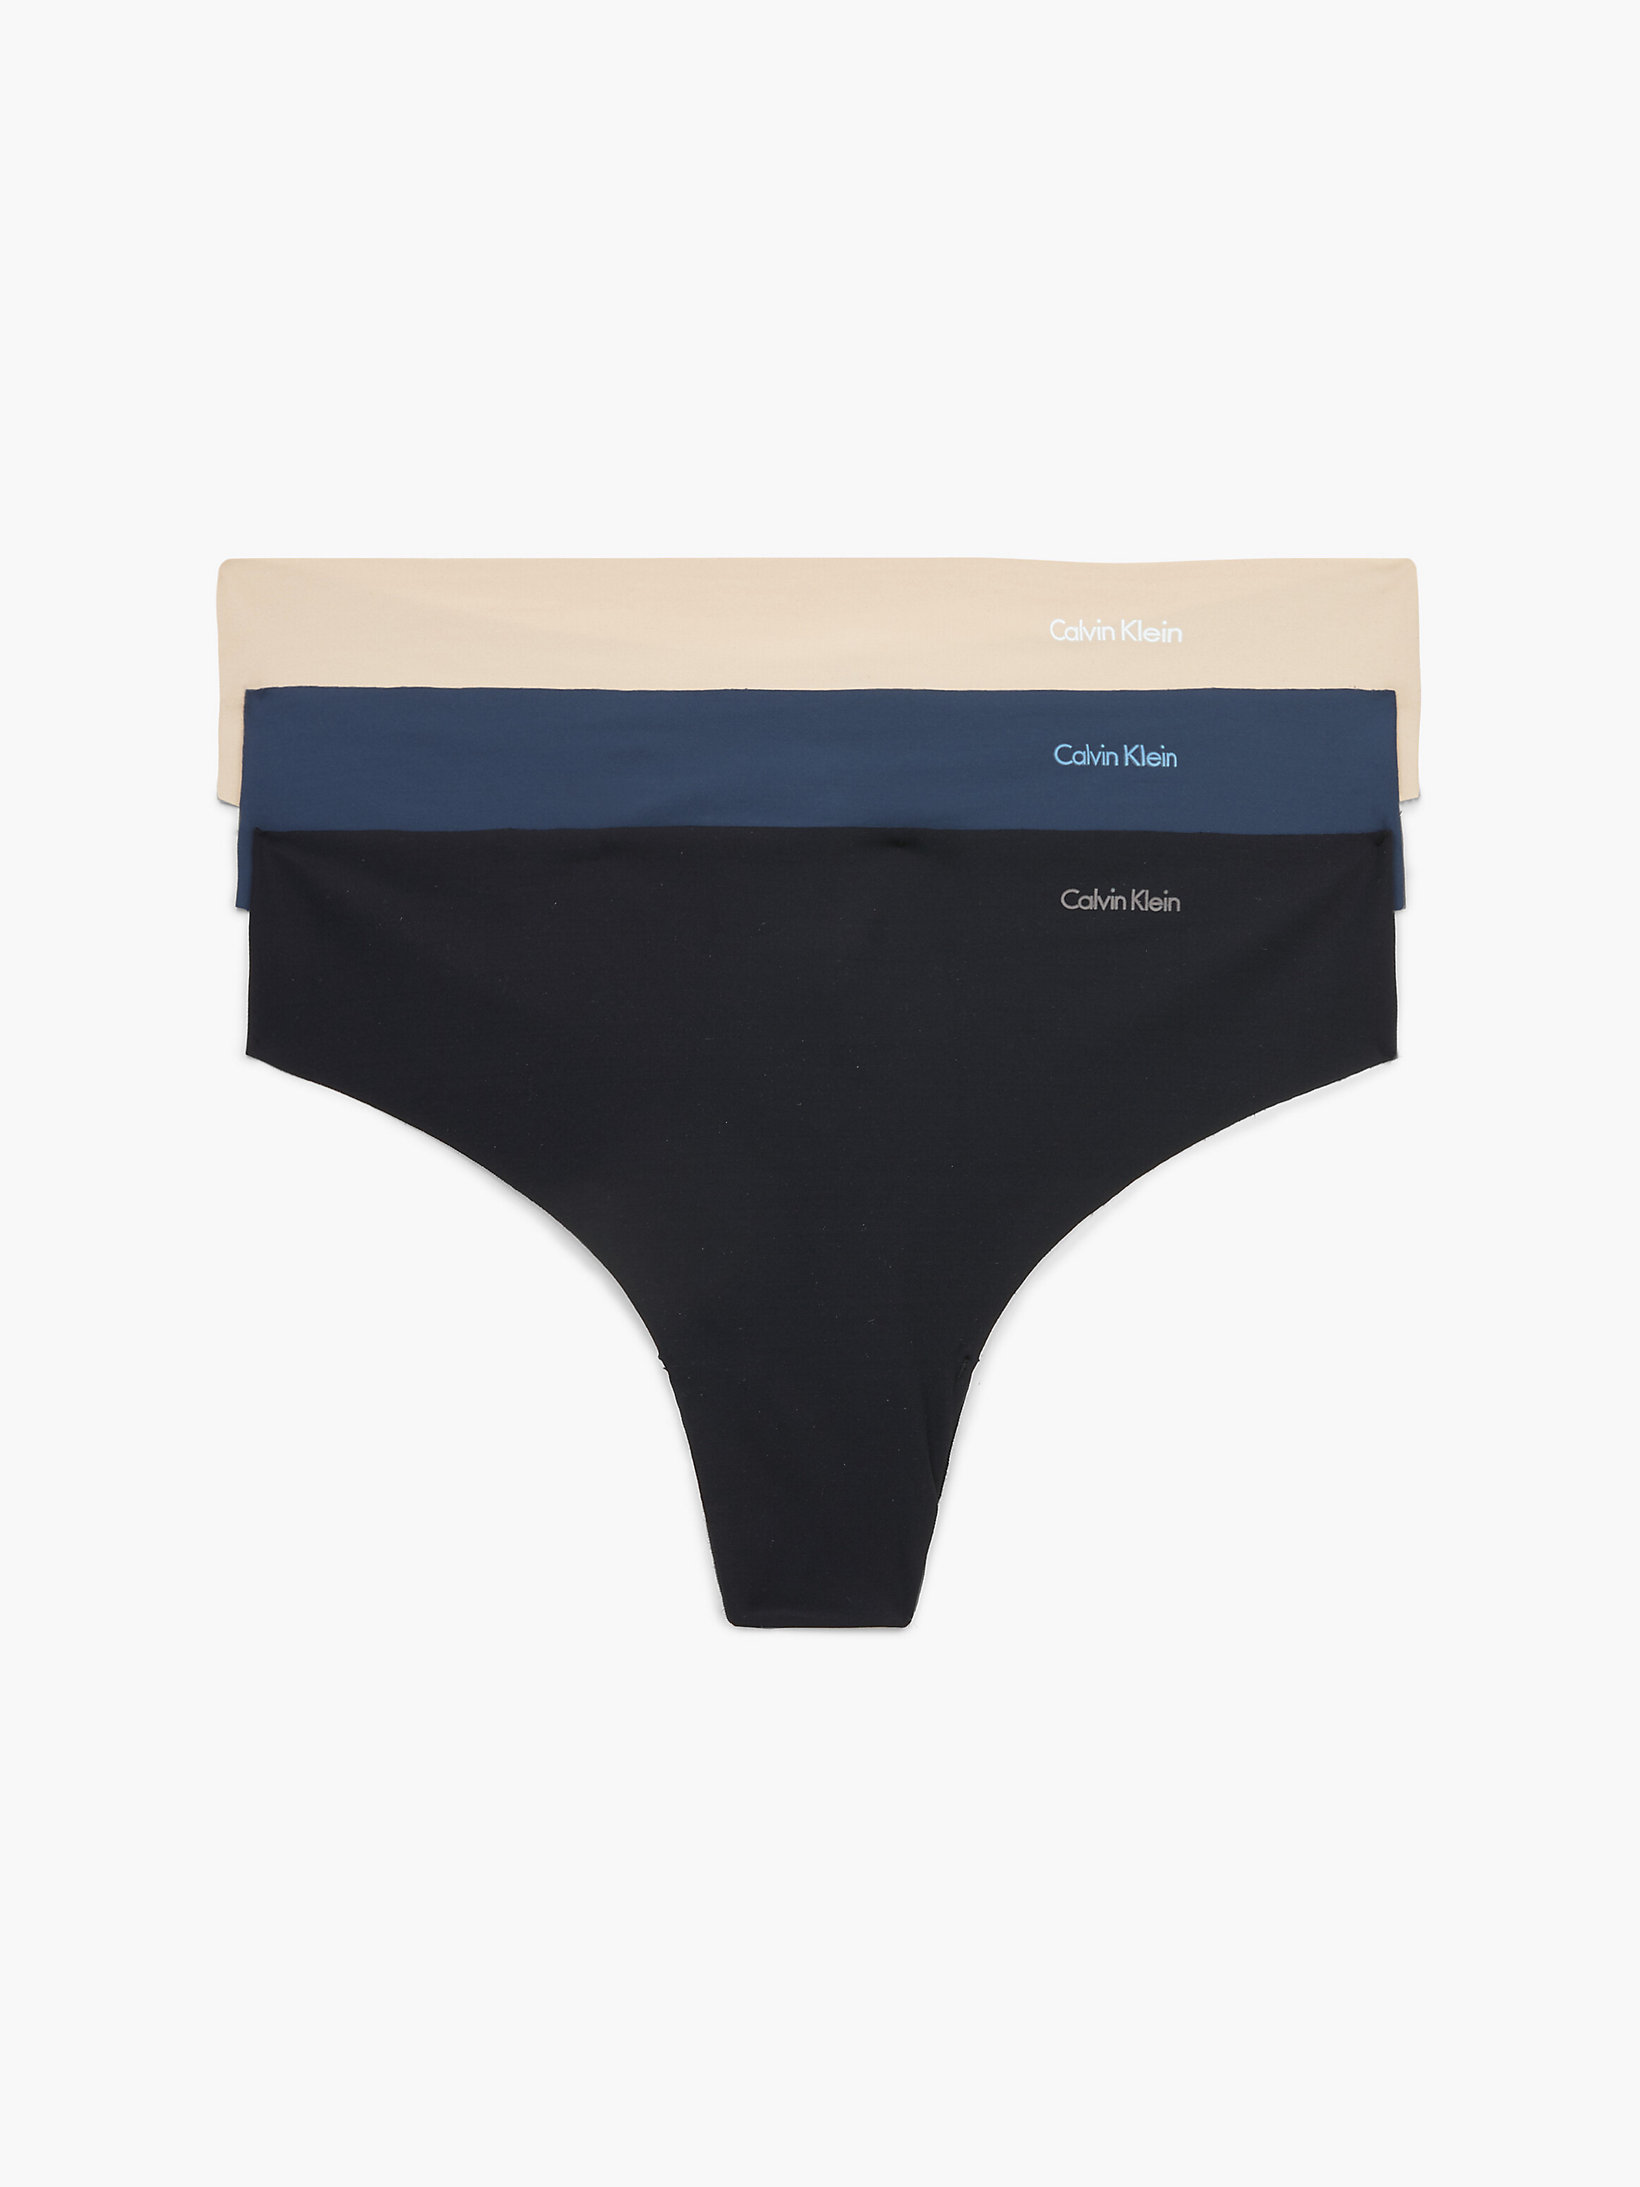 B/lc/s 3 Pack Thongs - Invisibles undefined women Calvin Klein